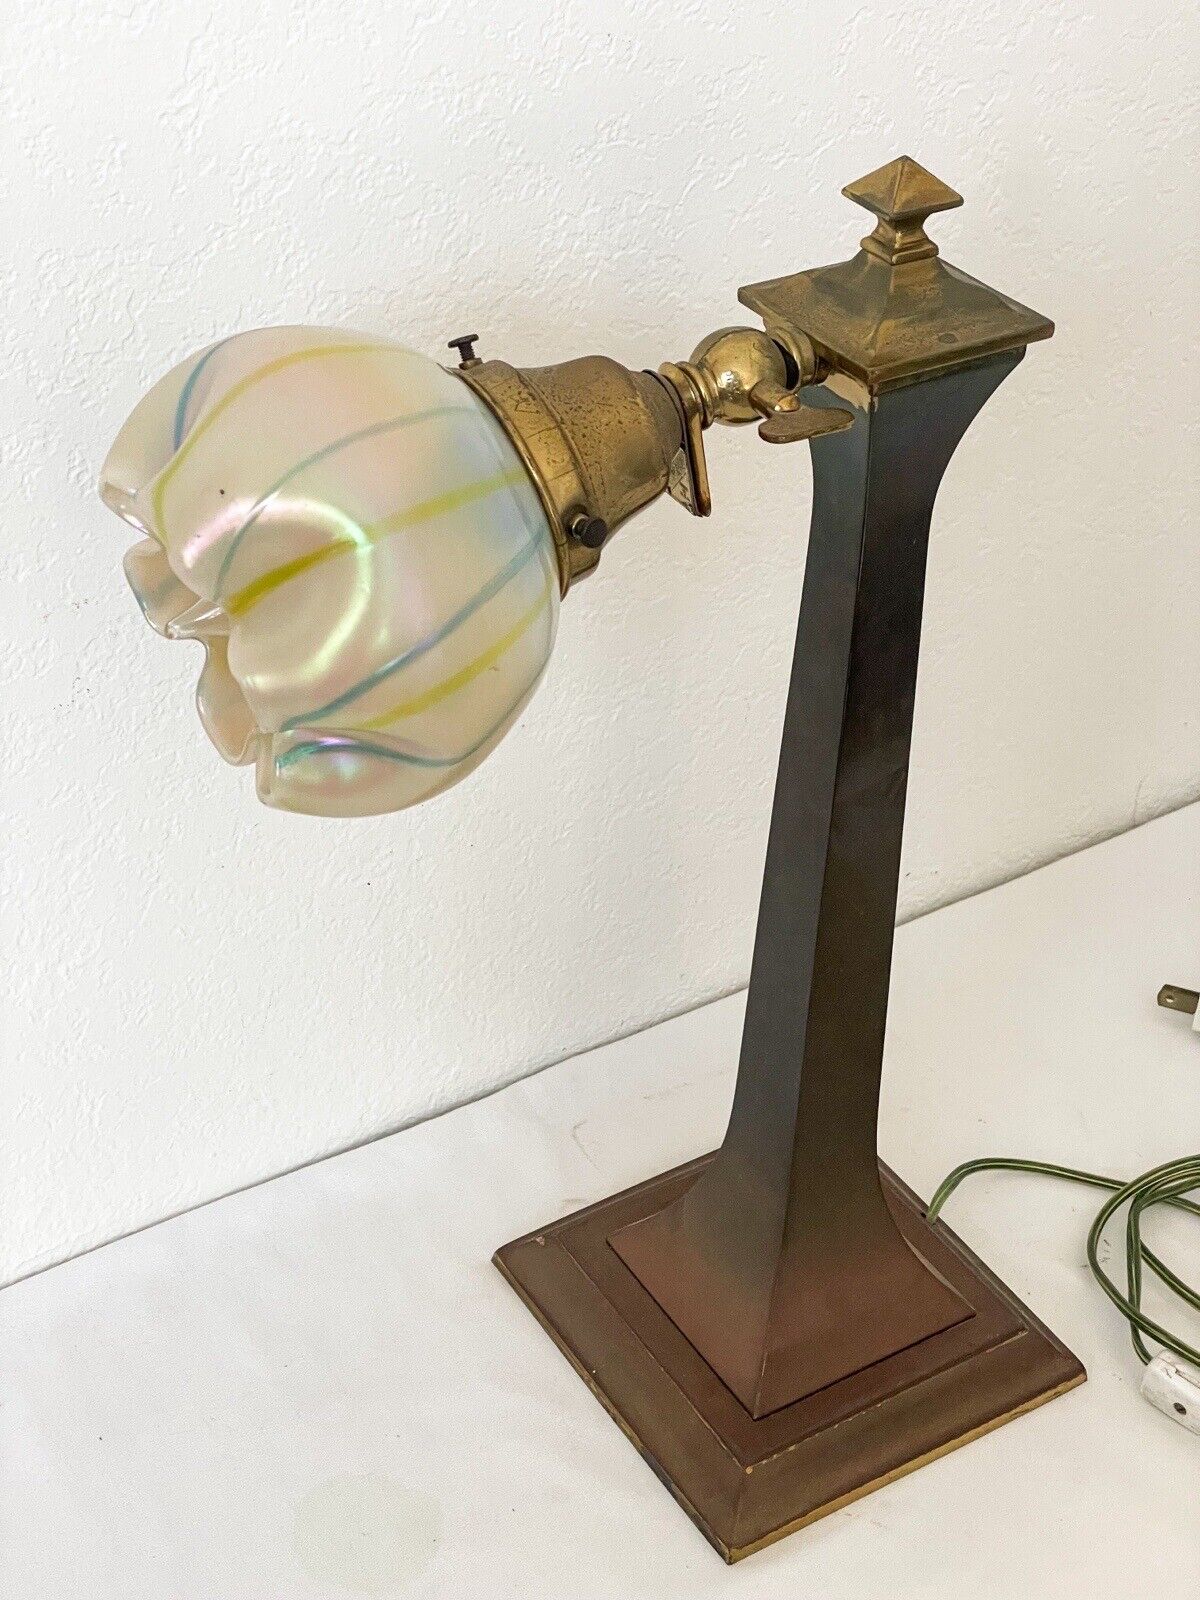 Rare Amronlite 1920’s Art Deco Desk Lamp With Candy Ruffled Blown Glass Shade